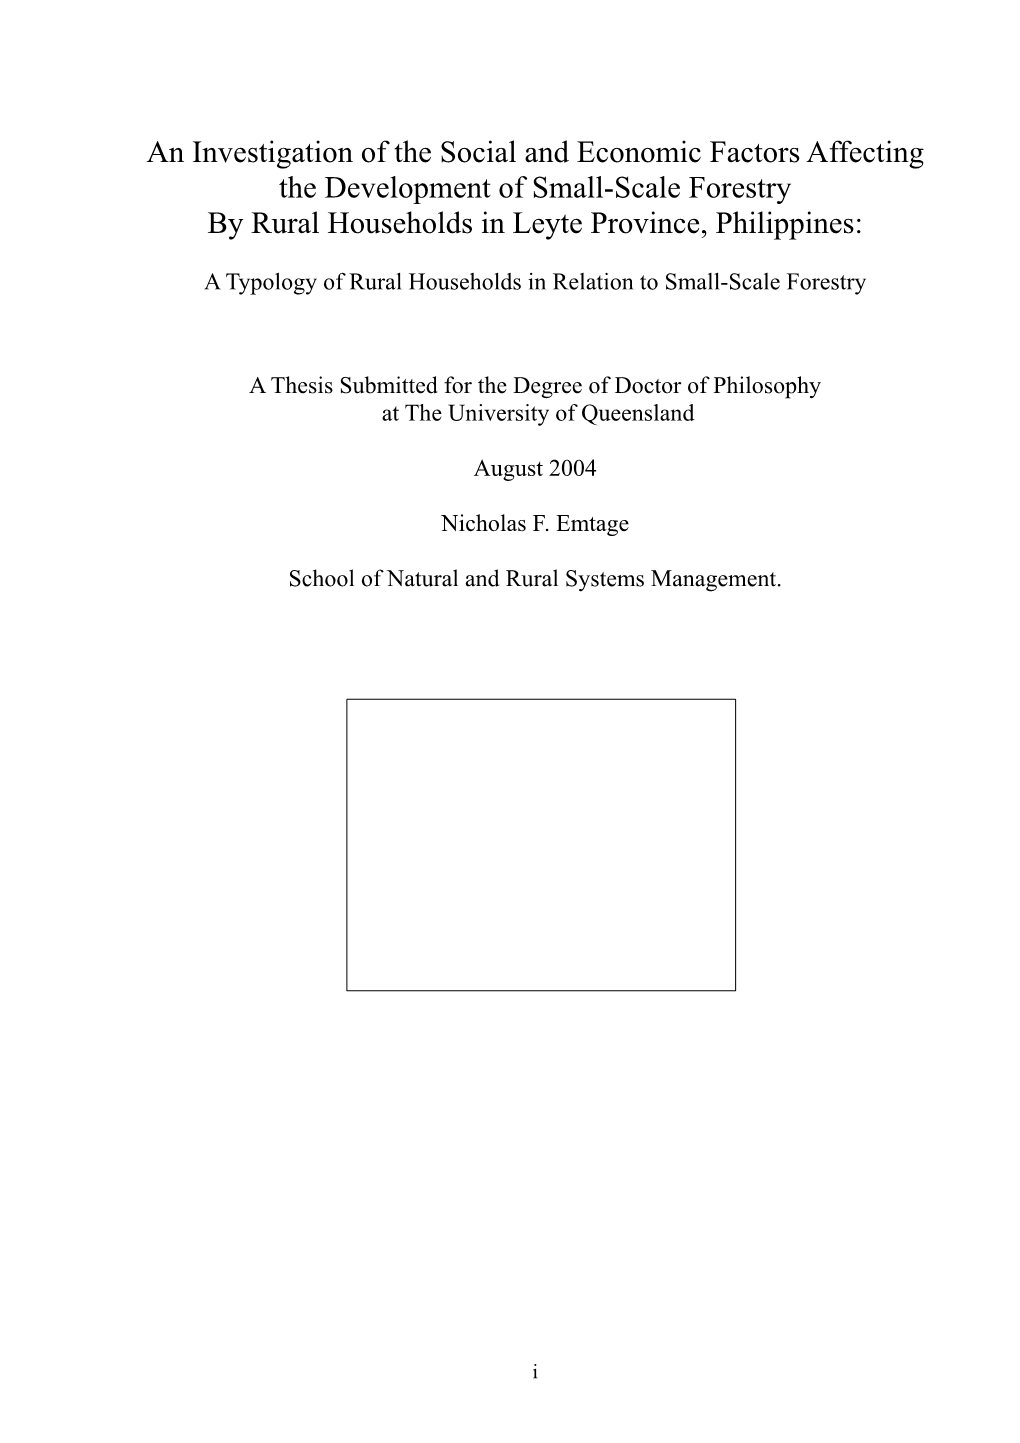 An Investigation of the Social and Economic Factors Affecting the Development of Small-Scale Forestry by Rural Households in Leyte Province, Philippines